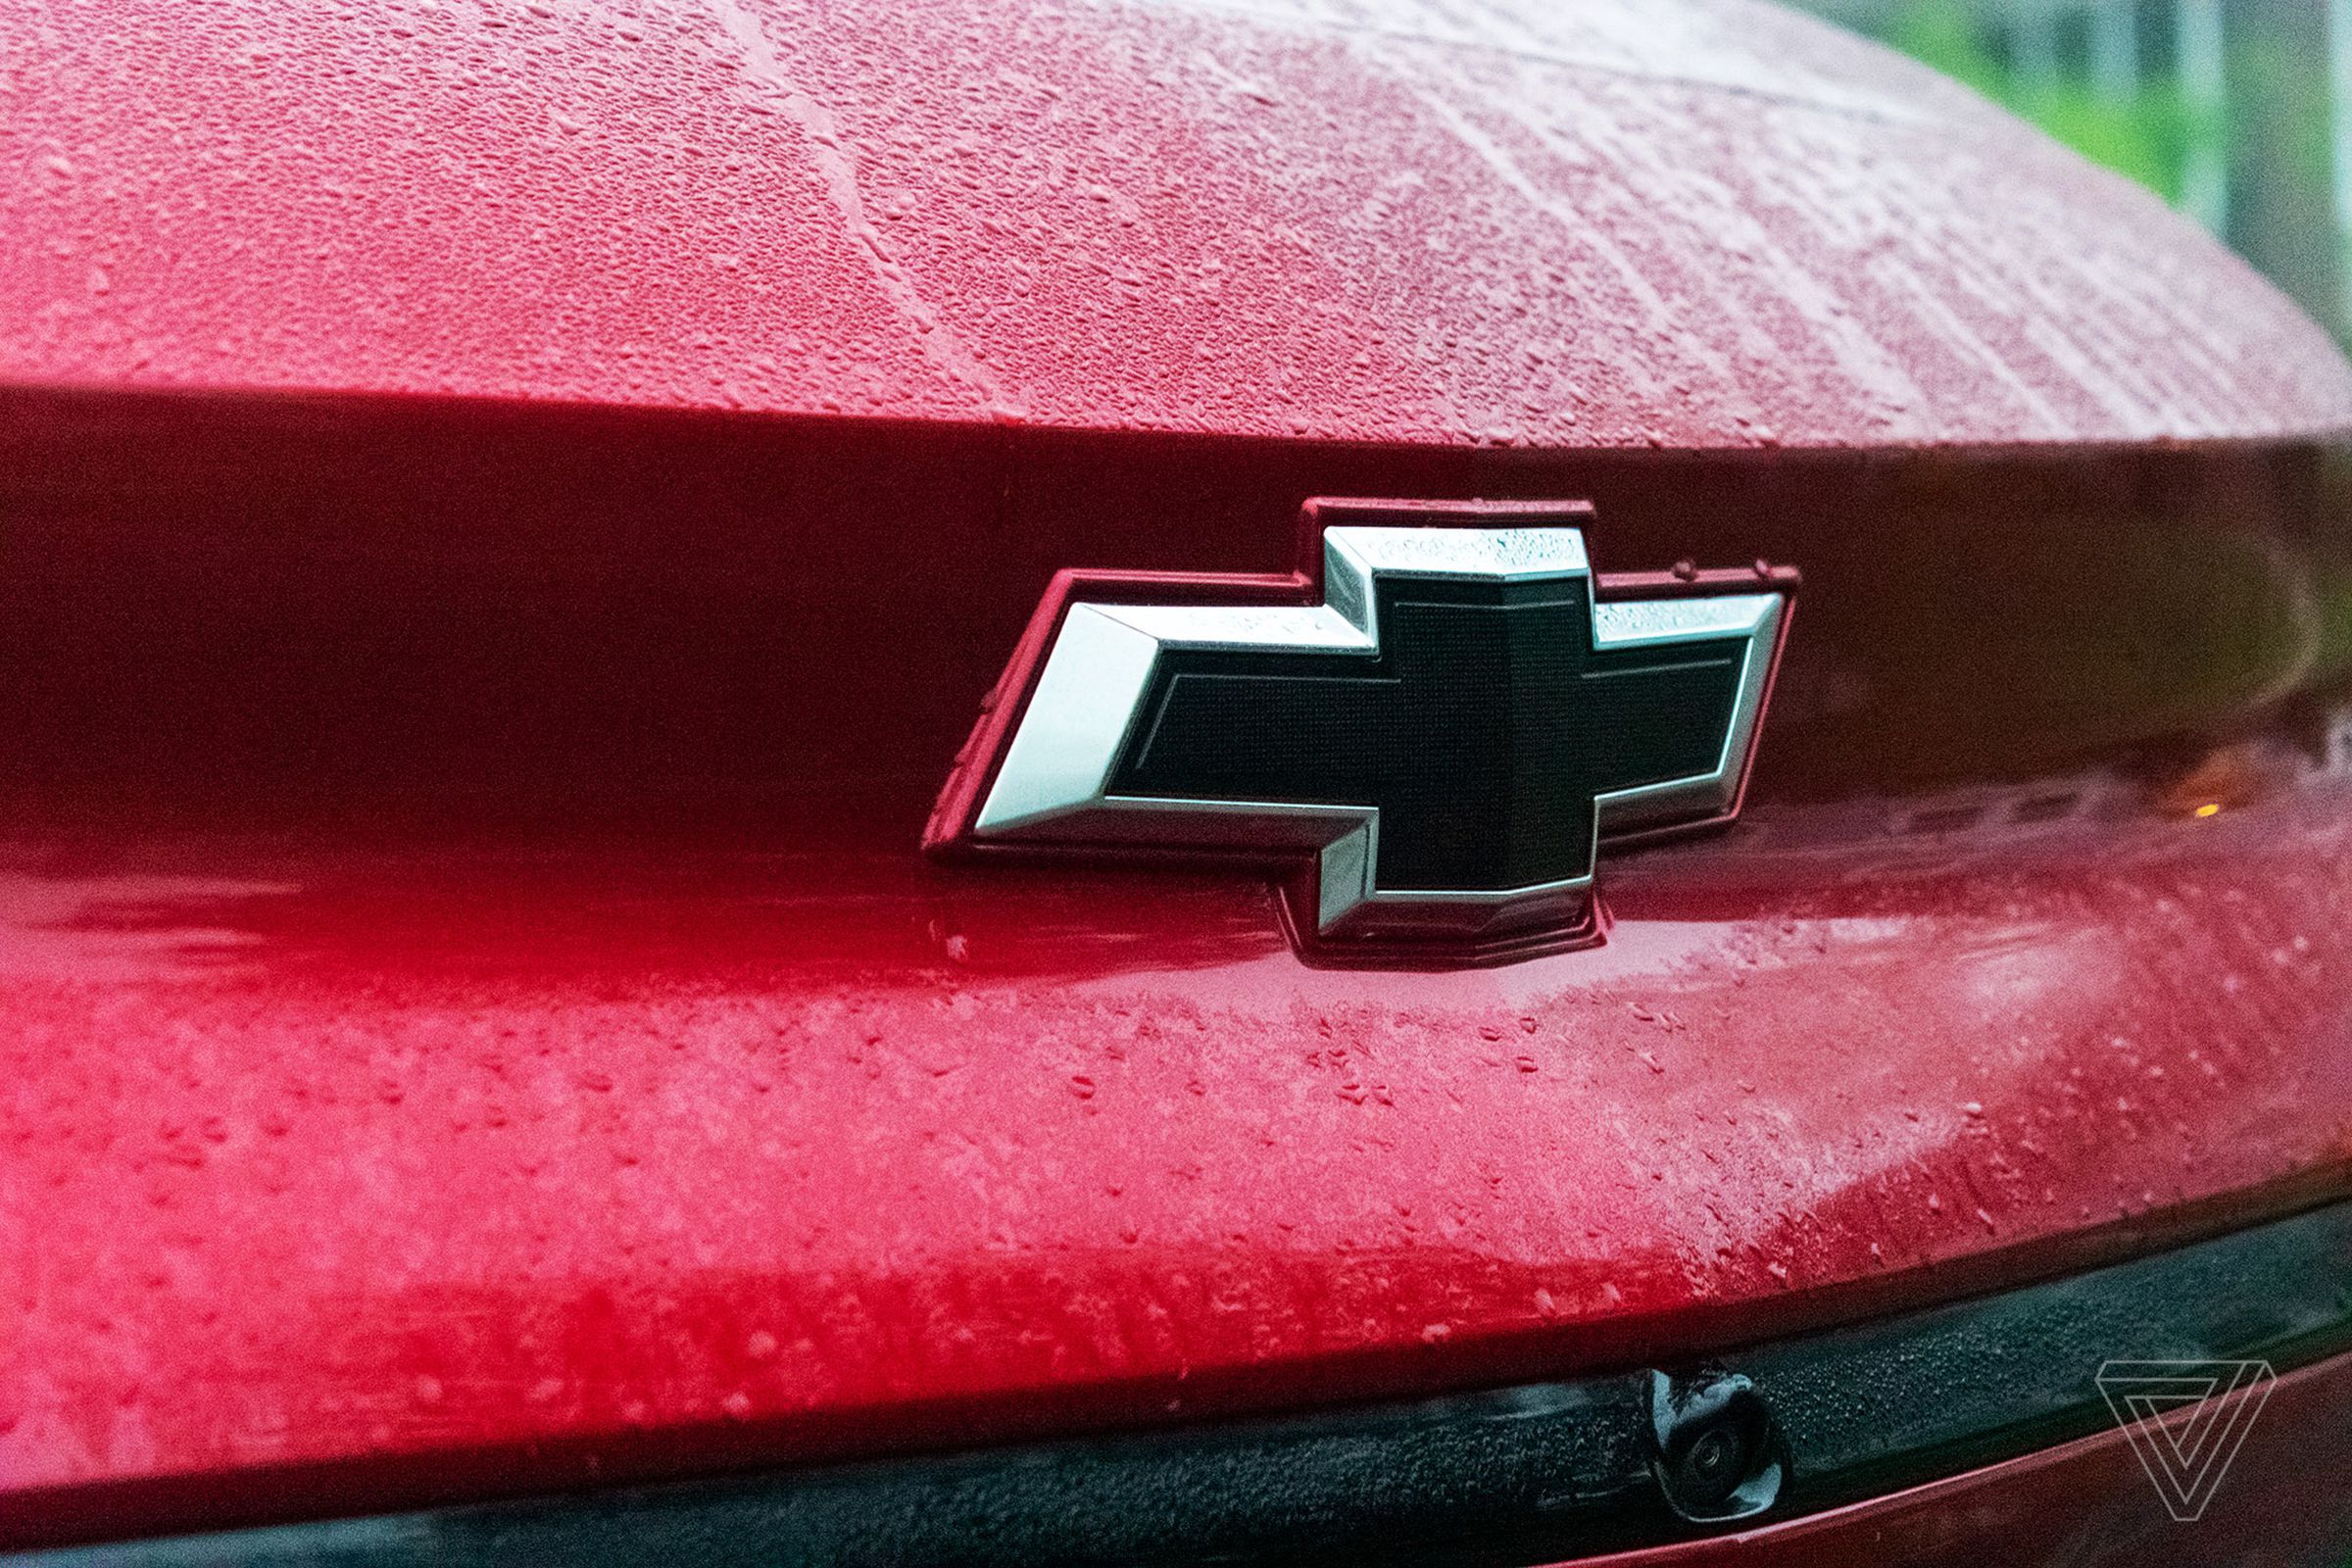 The Chevy logo on the front of a red vehicle